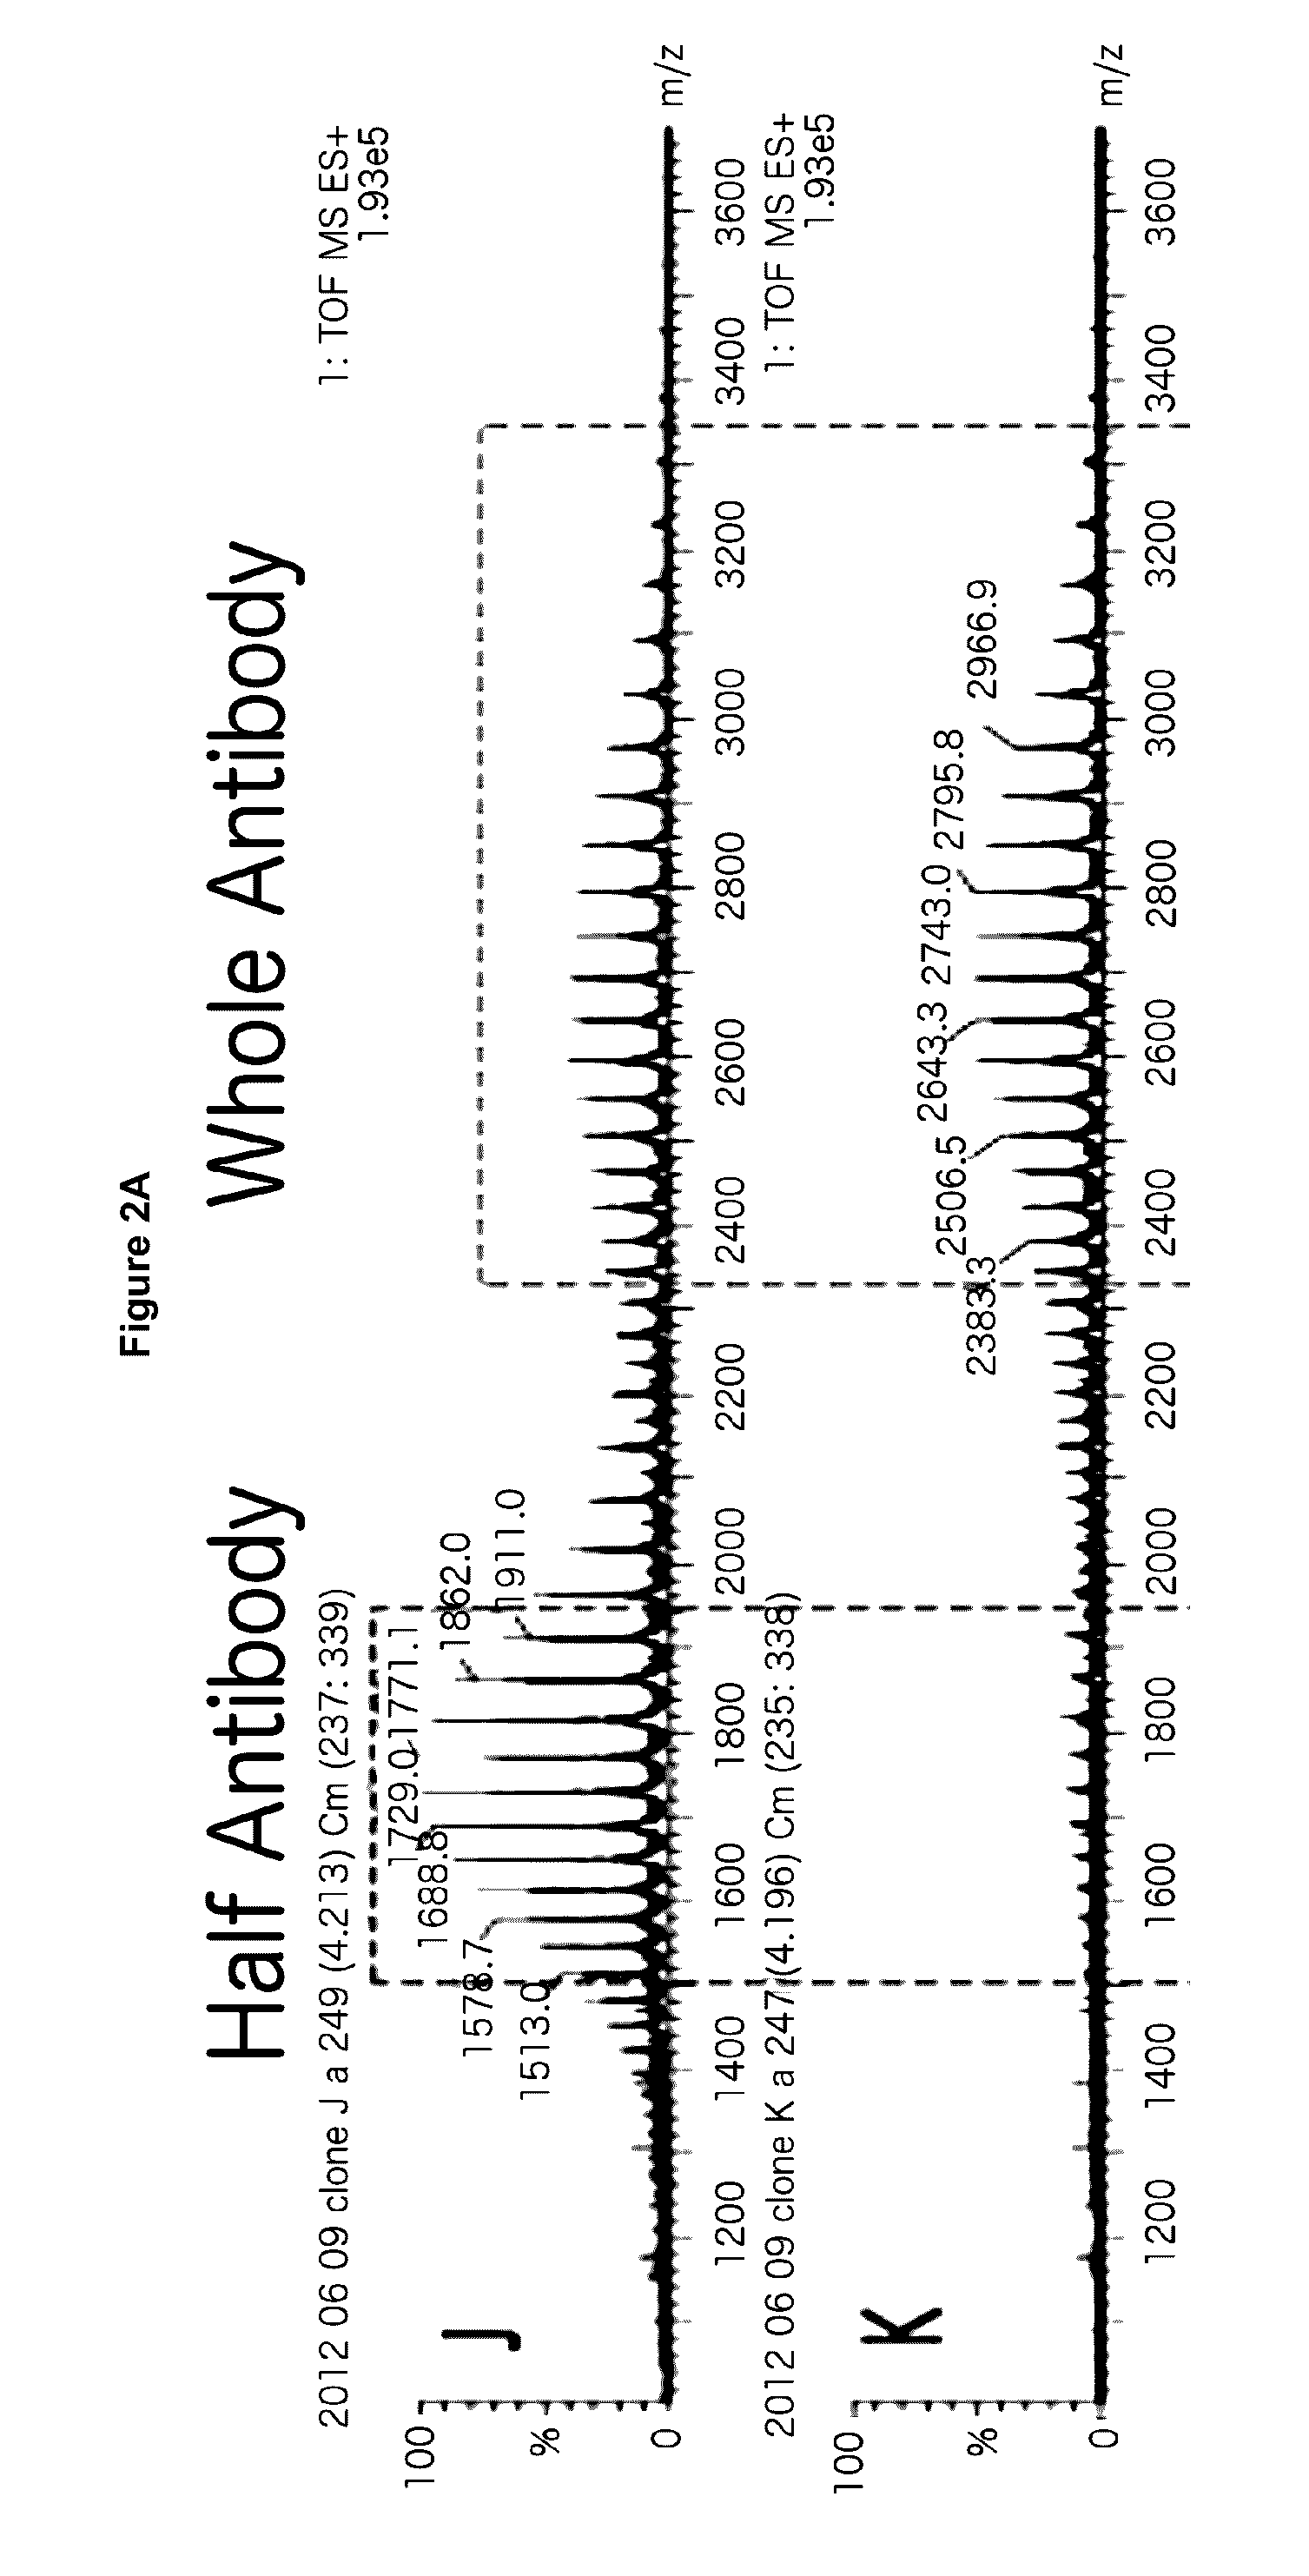 Process and methods for efficient manufacturing of highly pure asymmetric antibodies in mammalian cells